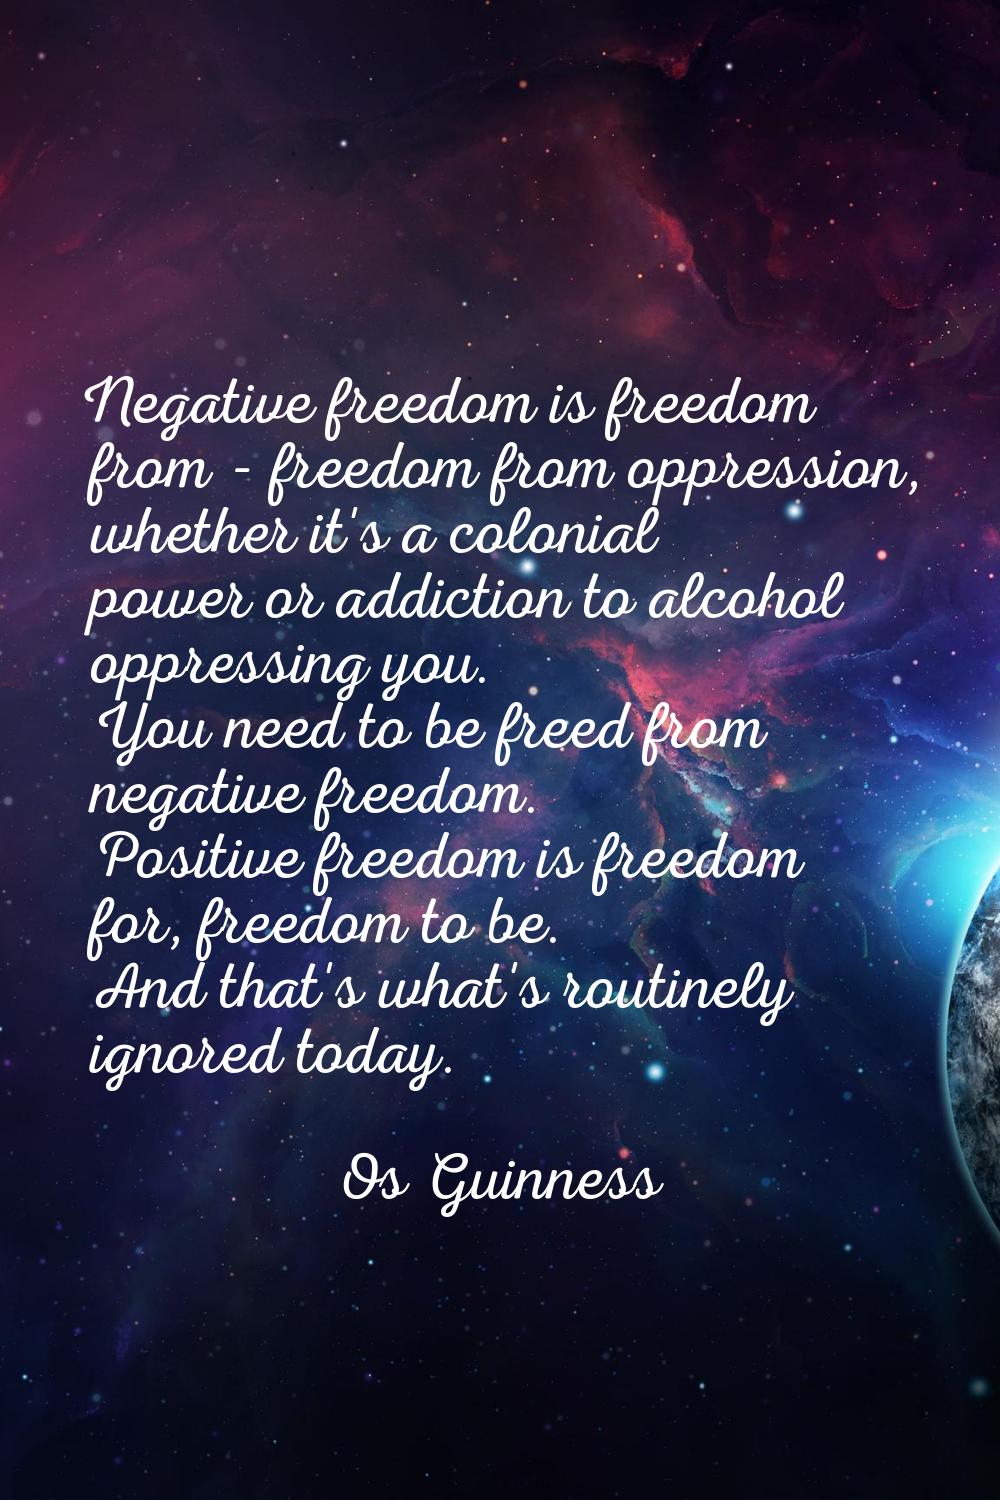 Negative freedom is freedom from - freedom from oppression, whether it's a colonial power or addict